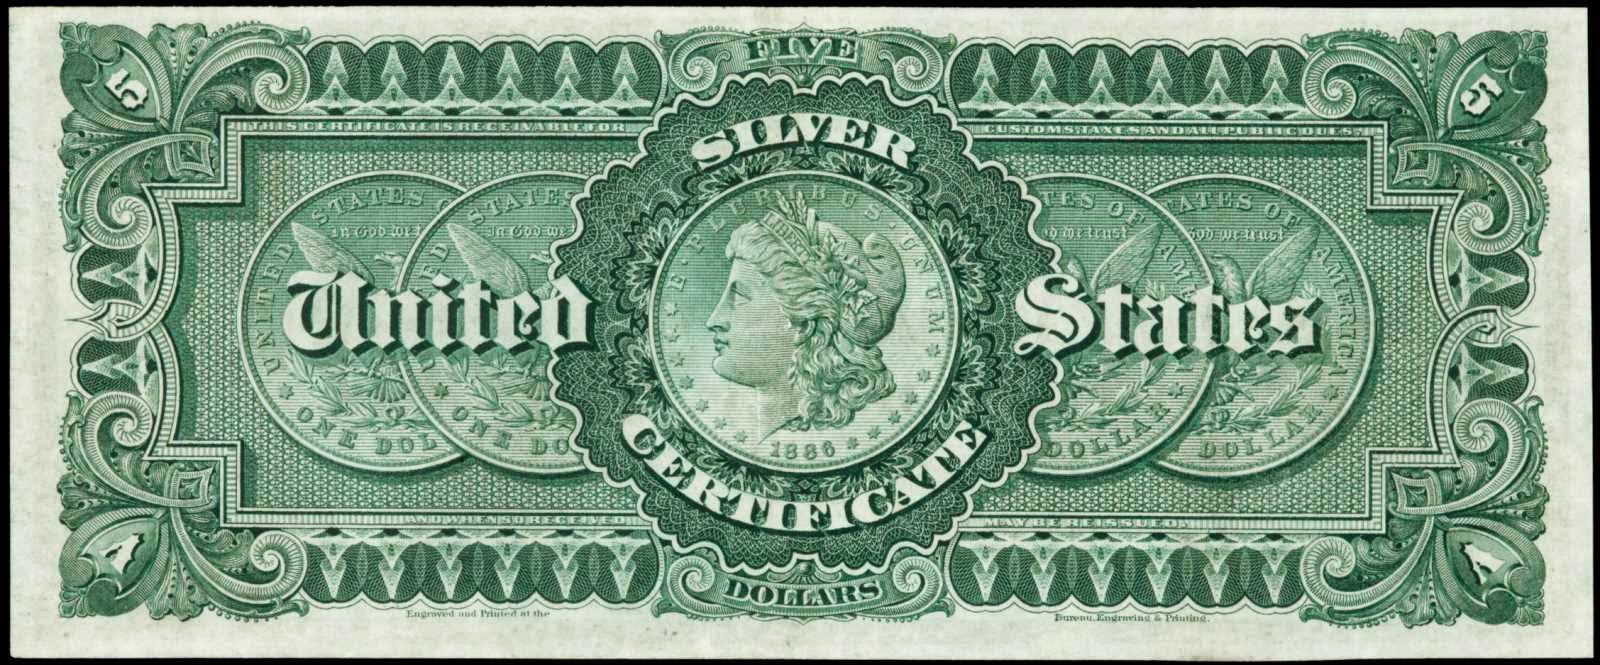 US currency 1886 5 Dollar Silver Certificate Morgan Silver Dollar Back Note